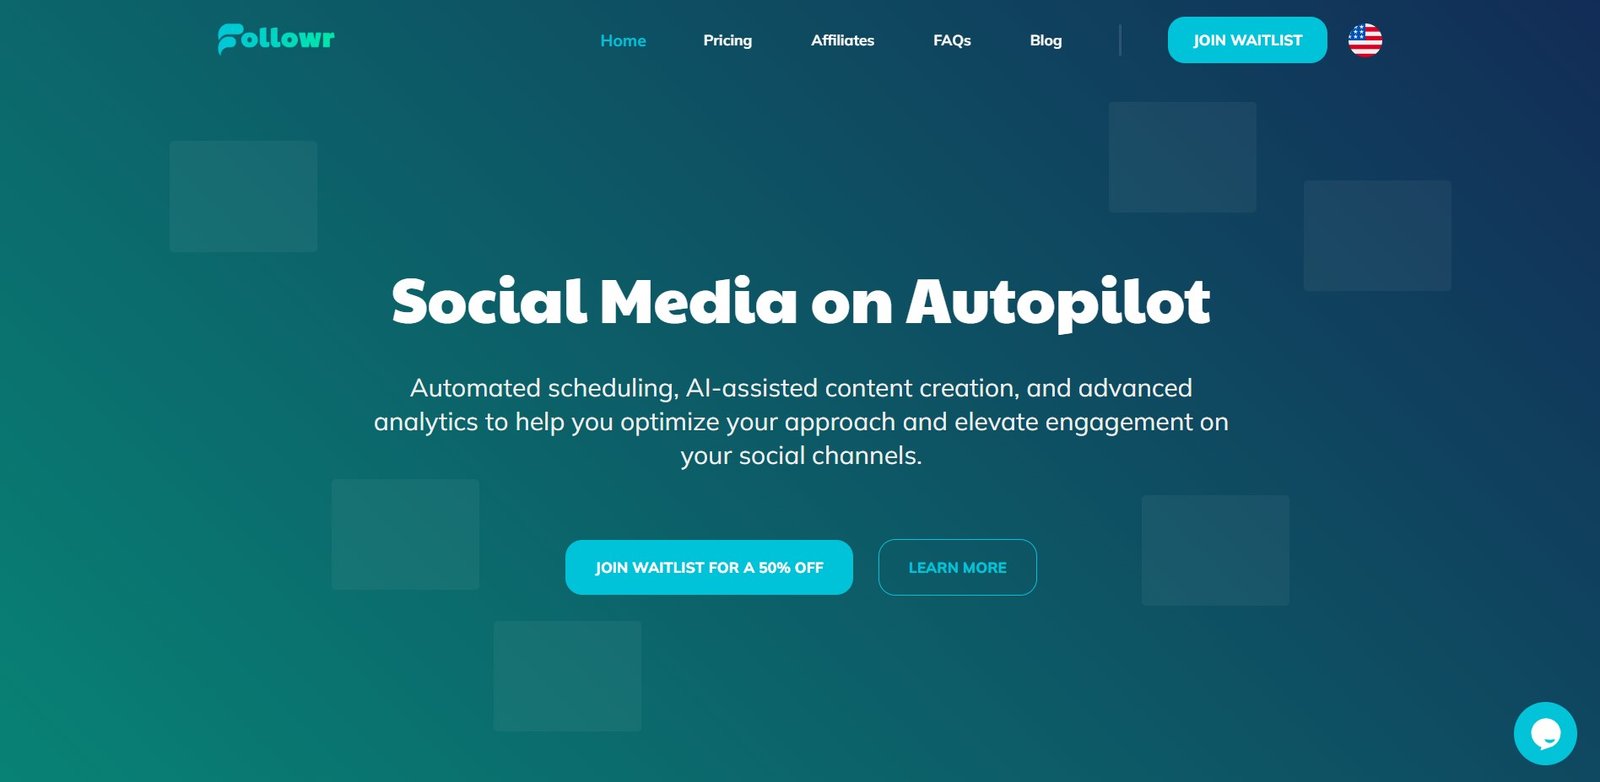 Followr is an AI-driven social media management platform for optimized scheduling